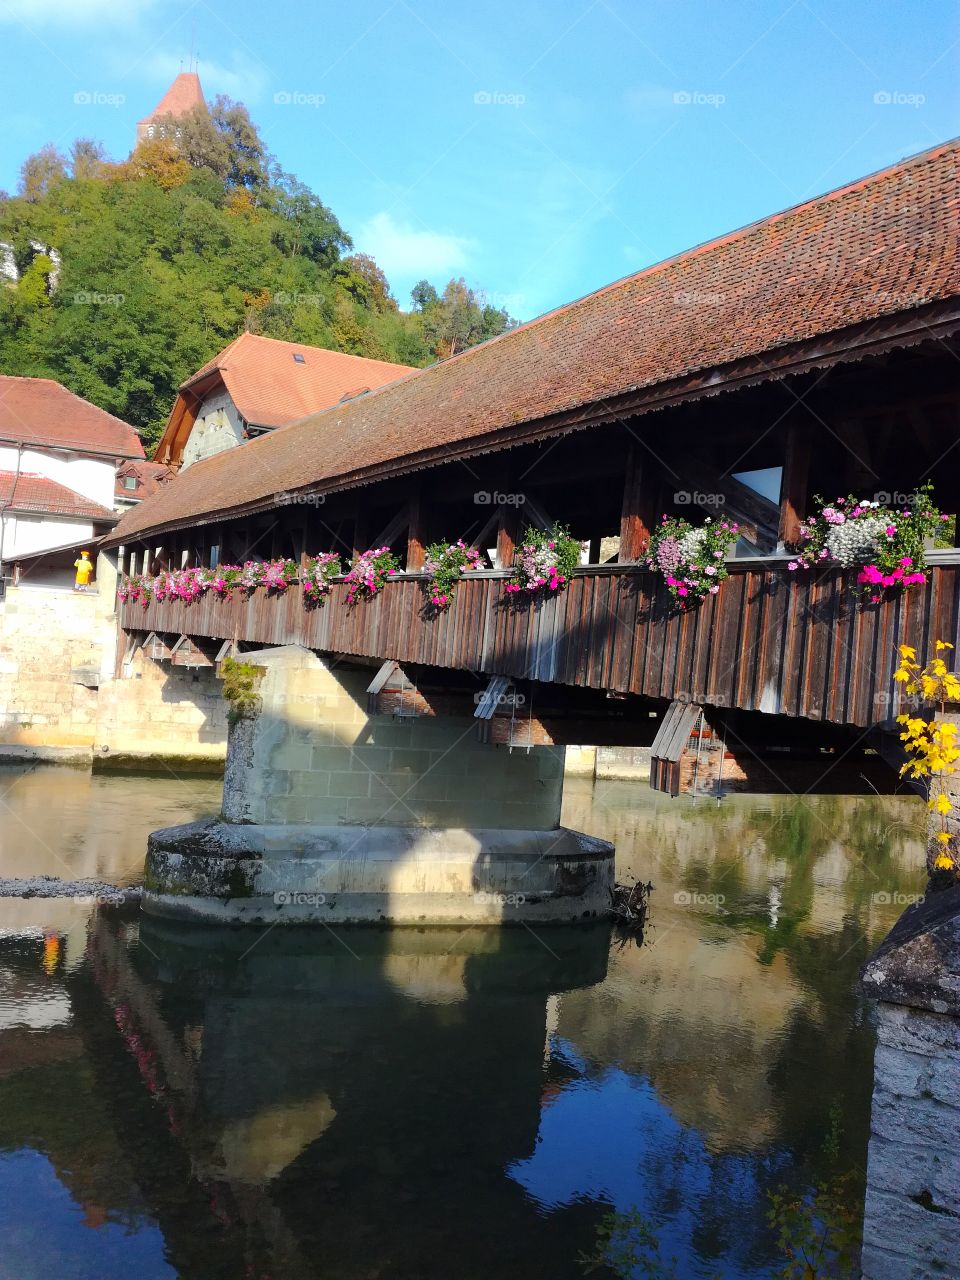 A really old bridge from the 1400 century